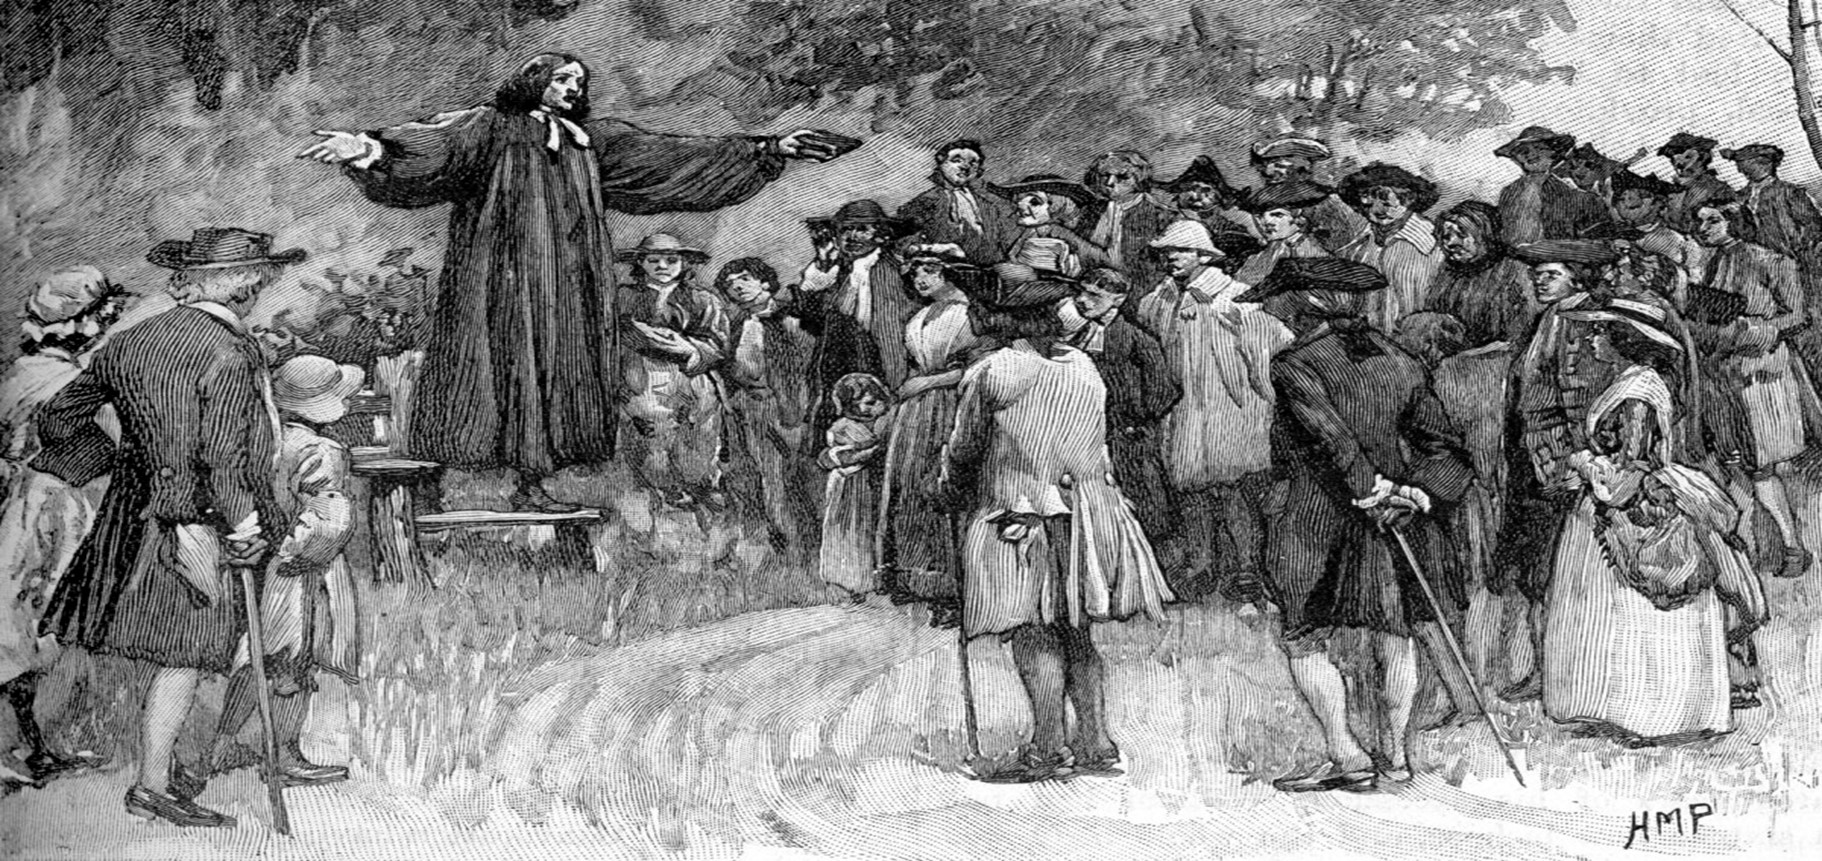 A Question of Religious Freedom: The 1773 Baptist Preacher Trial